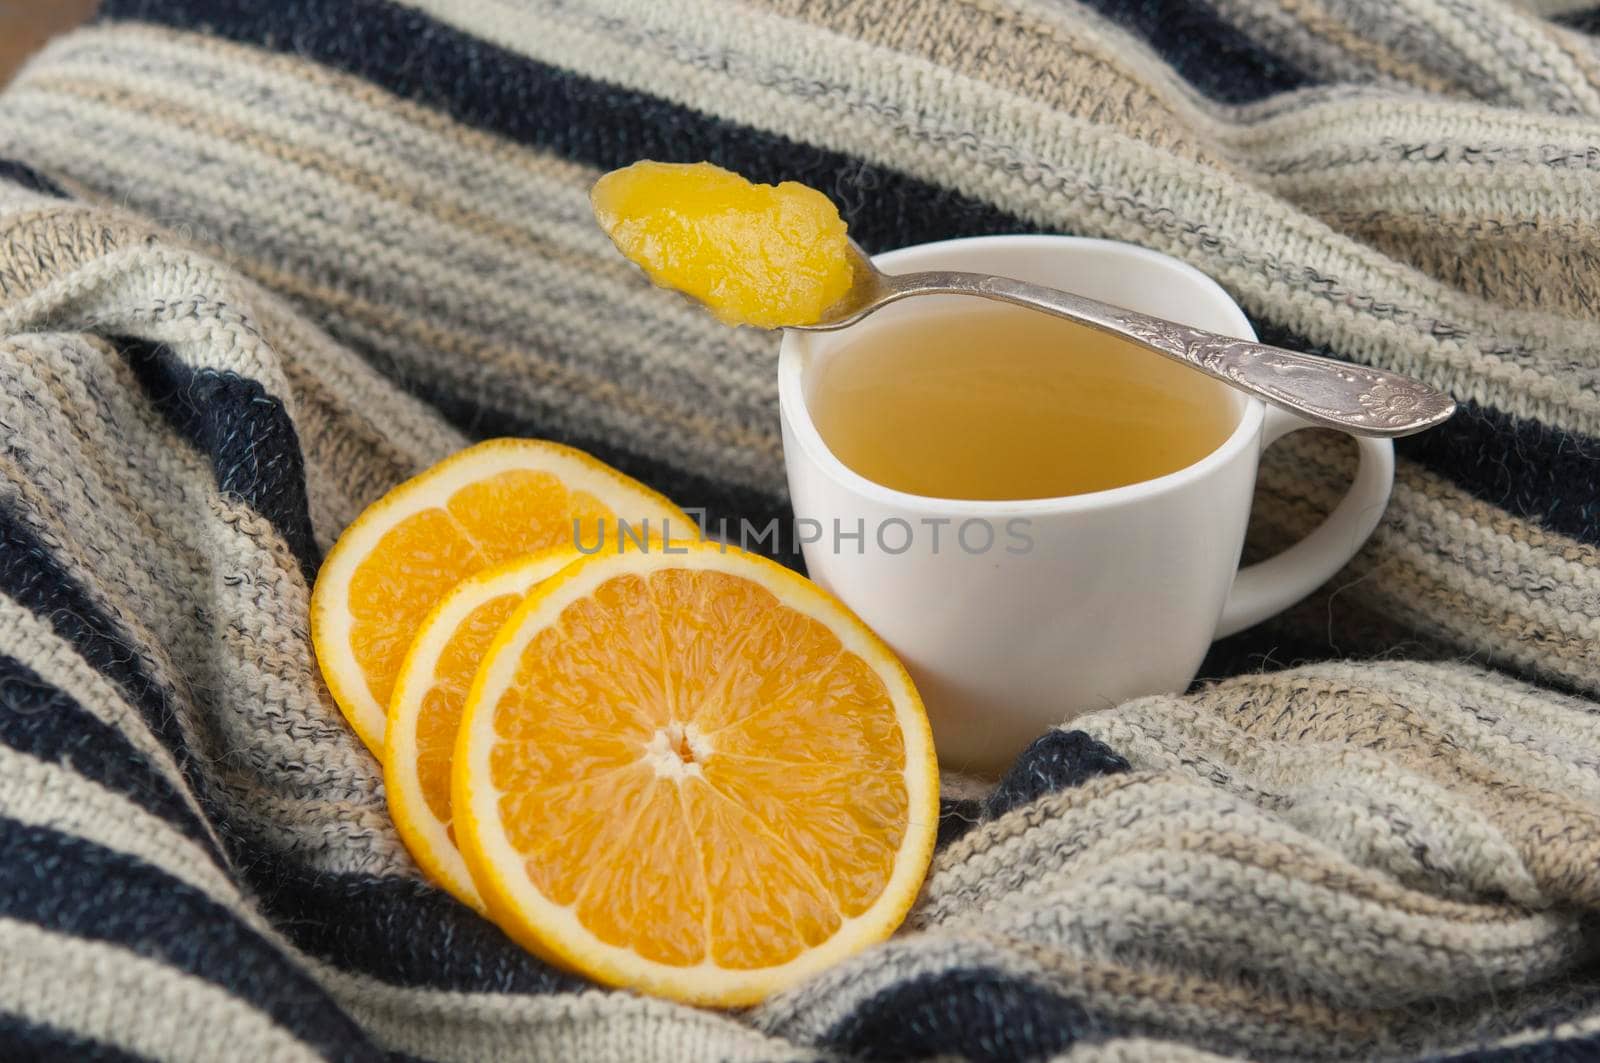 cozy autumn Breakfast with tea in white cup with honey and a warm knitted sweater   by inxti